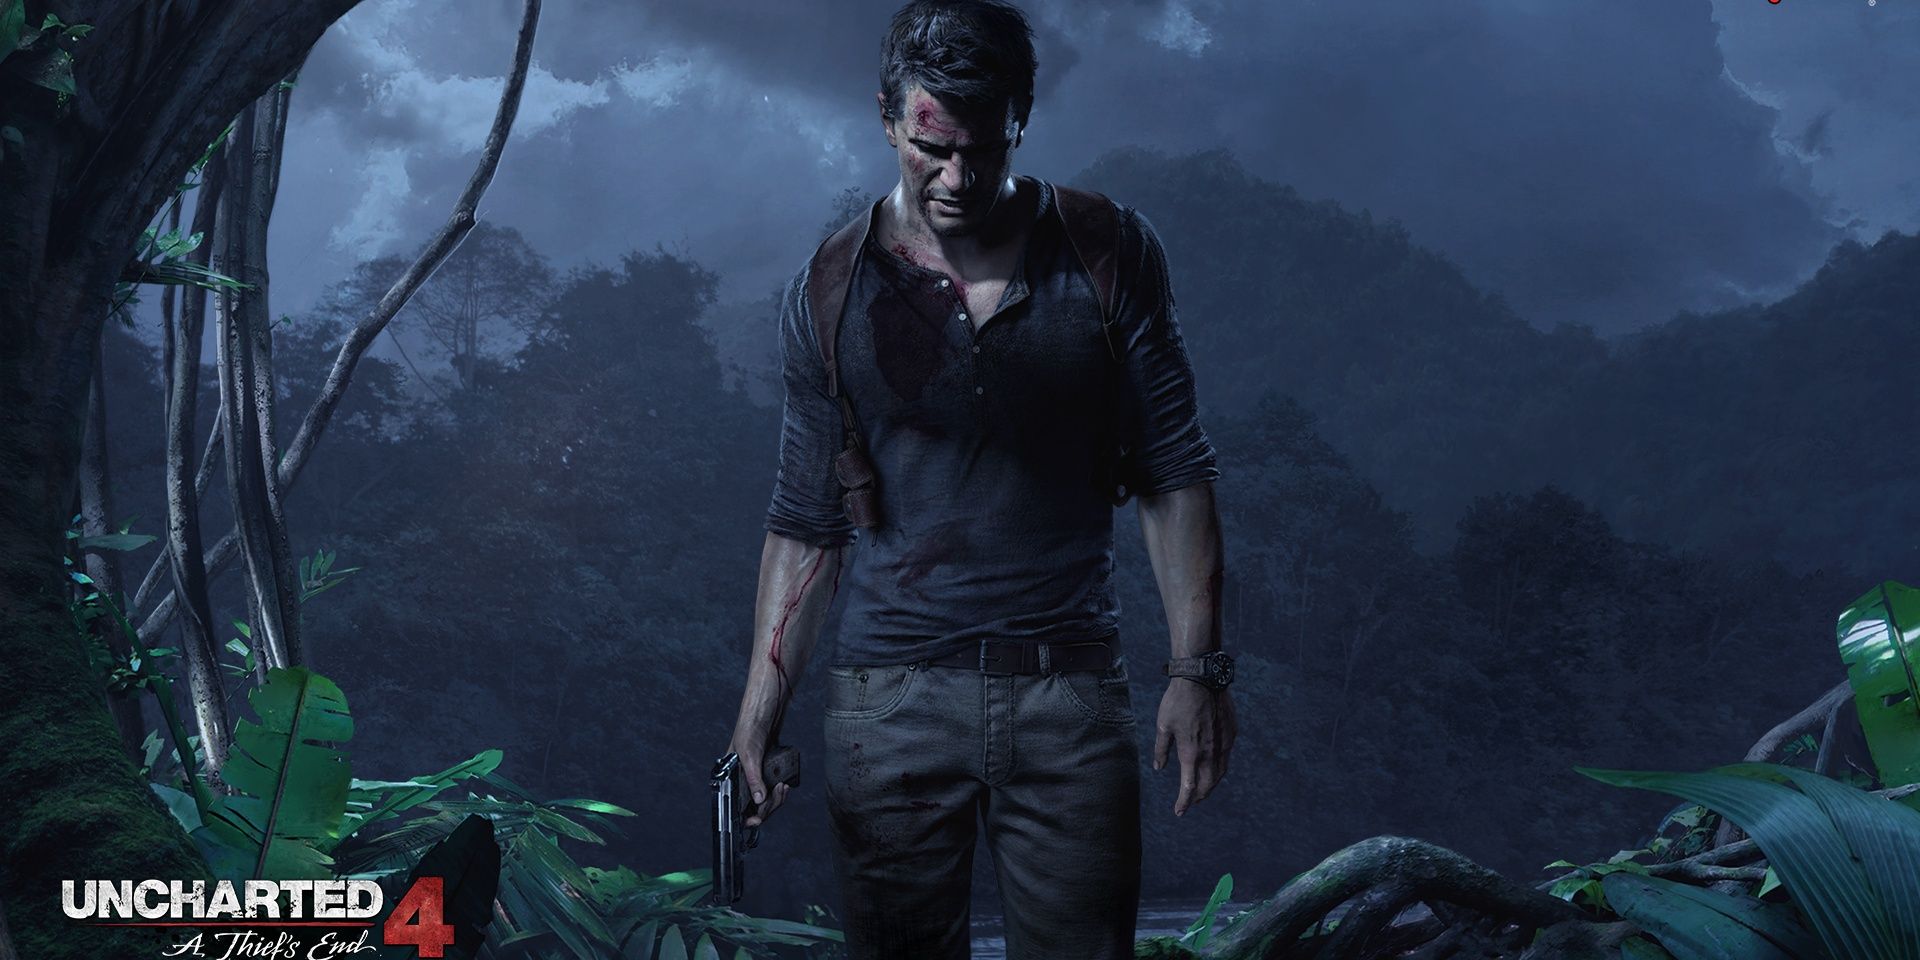 nathan drake standing holding a gun with blood